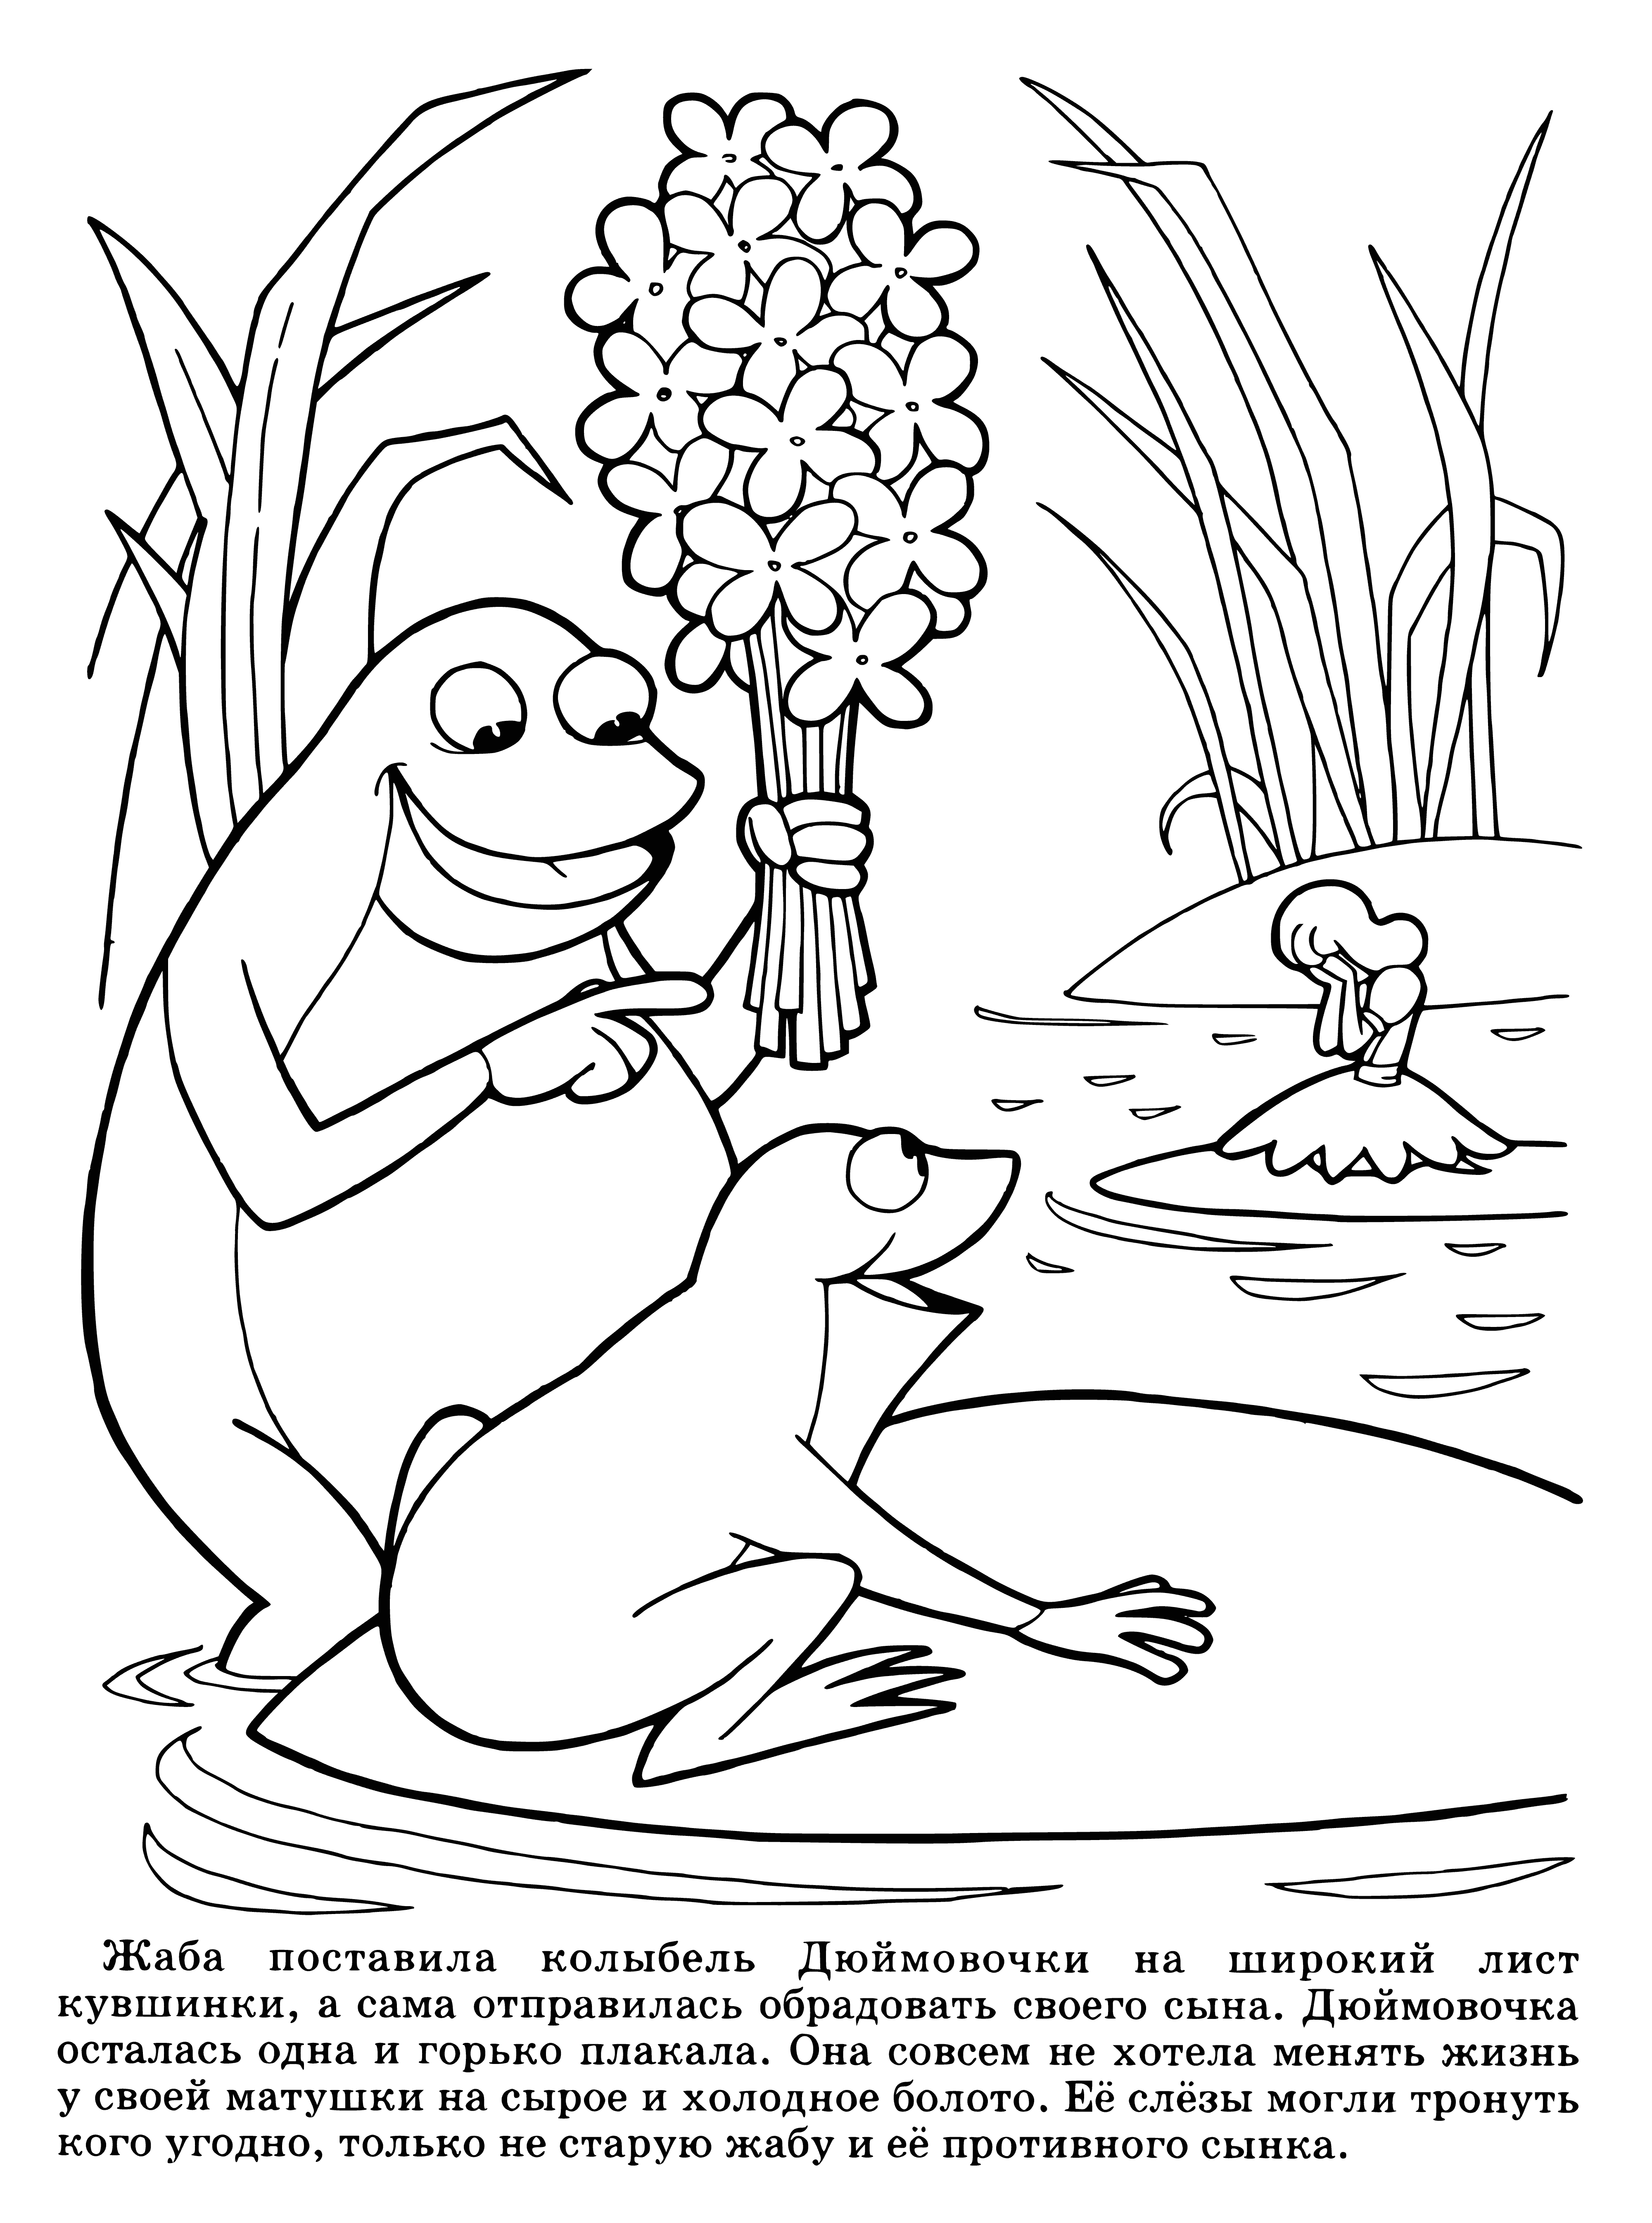 There is your bride coloring page